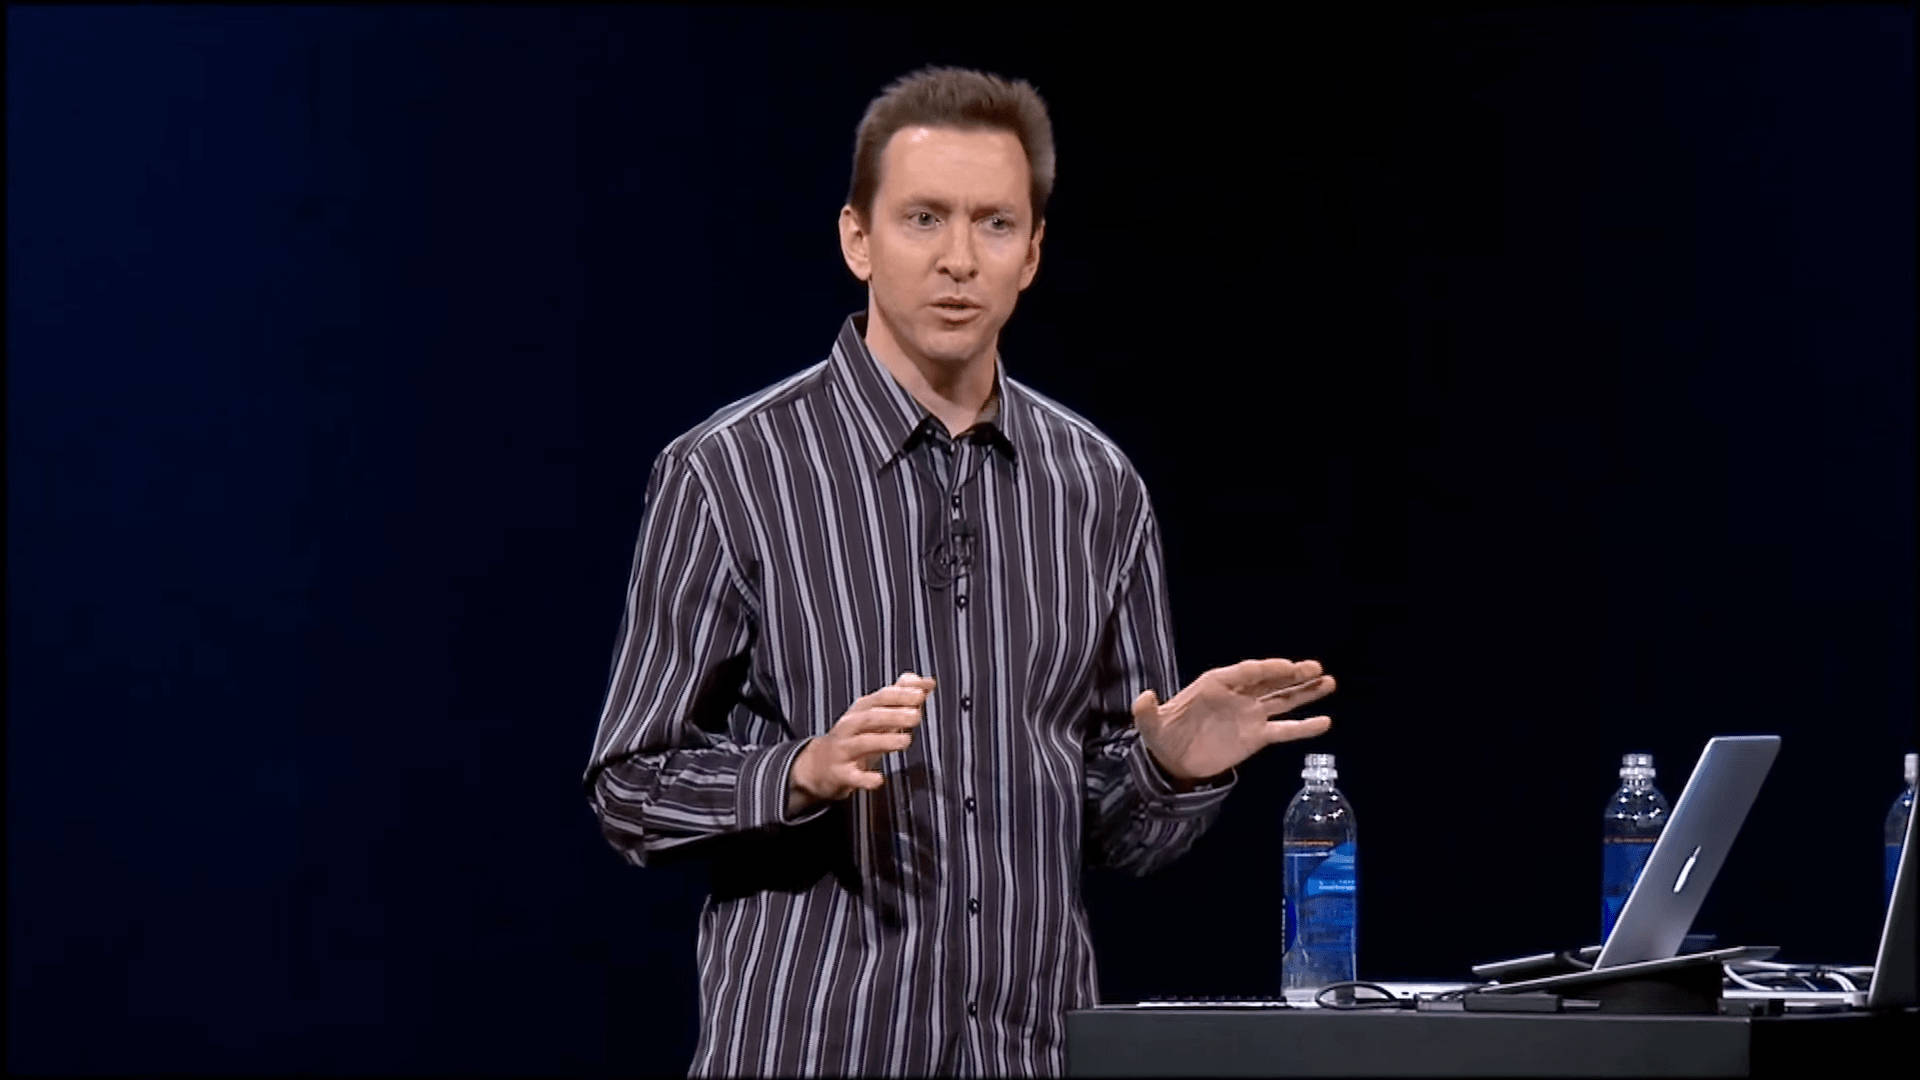 Scott Forstall In A Striped Shirt Picture